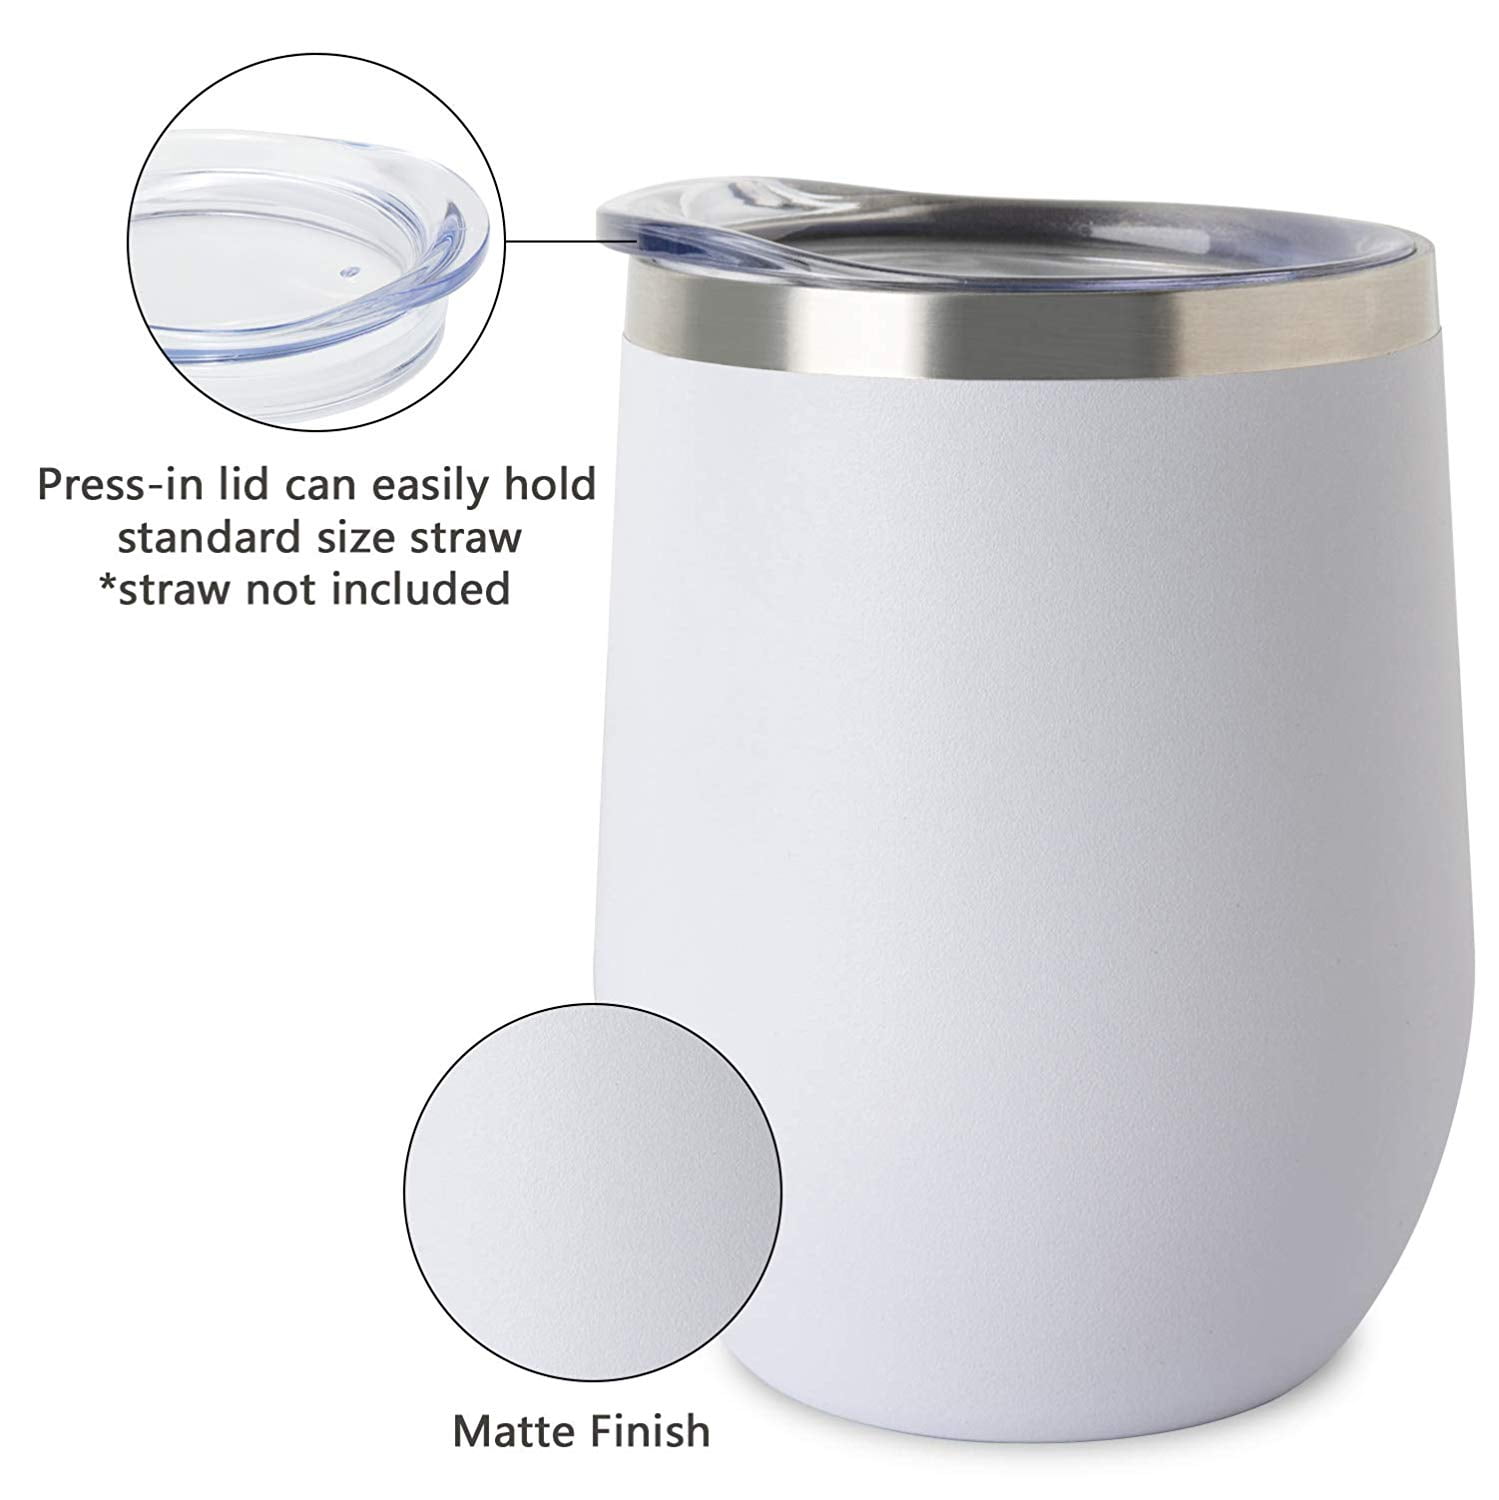 Enjoy Your Chilled Drink at the Perfect Temperature Soda or Water Mint 12oz Stainless Steel Vacuum Insulated Cup REDUCE Stemless Wine Tumbler with Lid Ideal for an Outdoor Cocktail